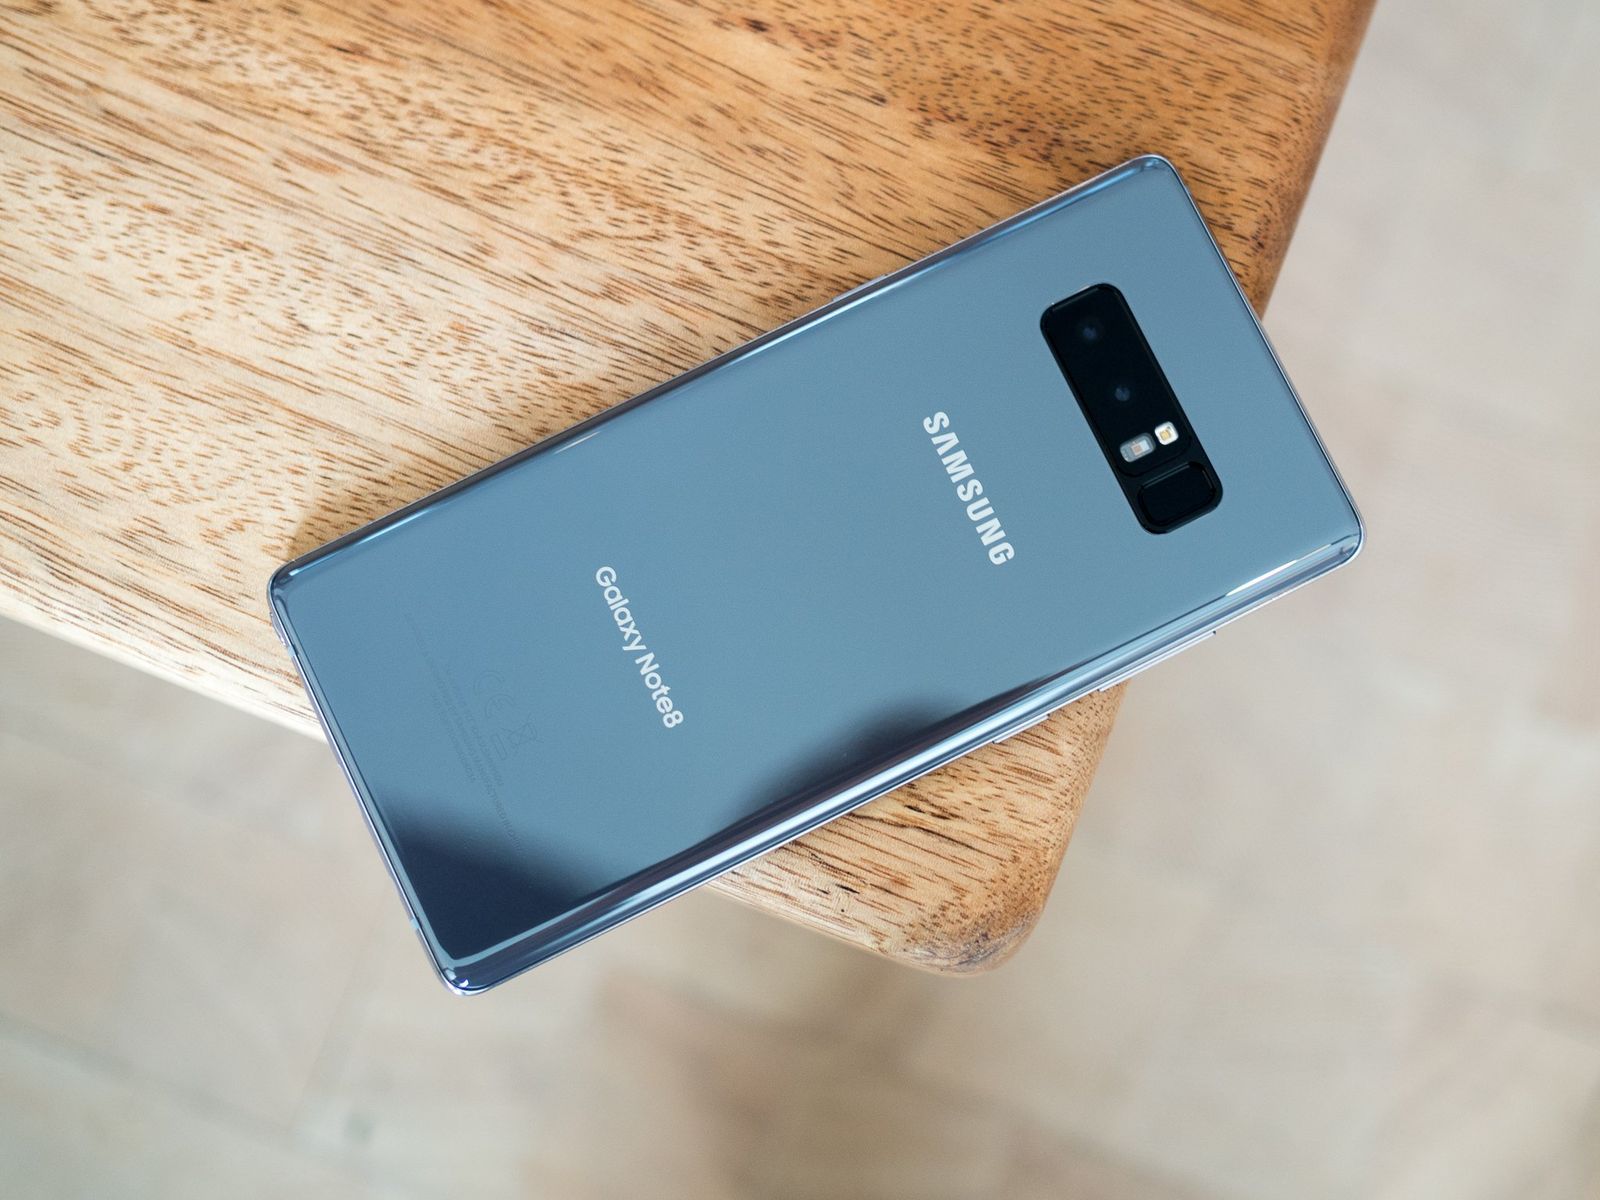 Should you buy a Galaxy Note 8 in 2020